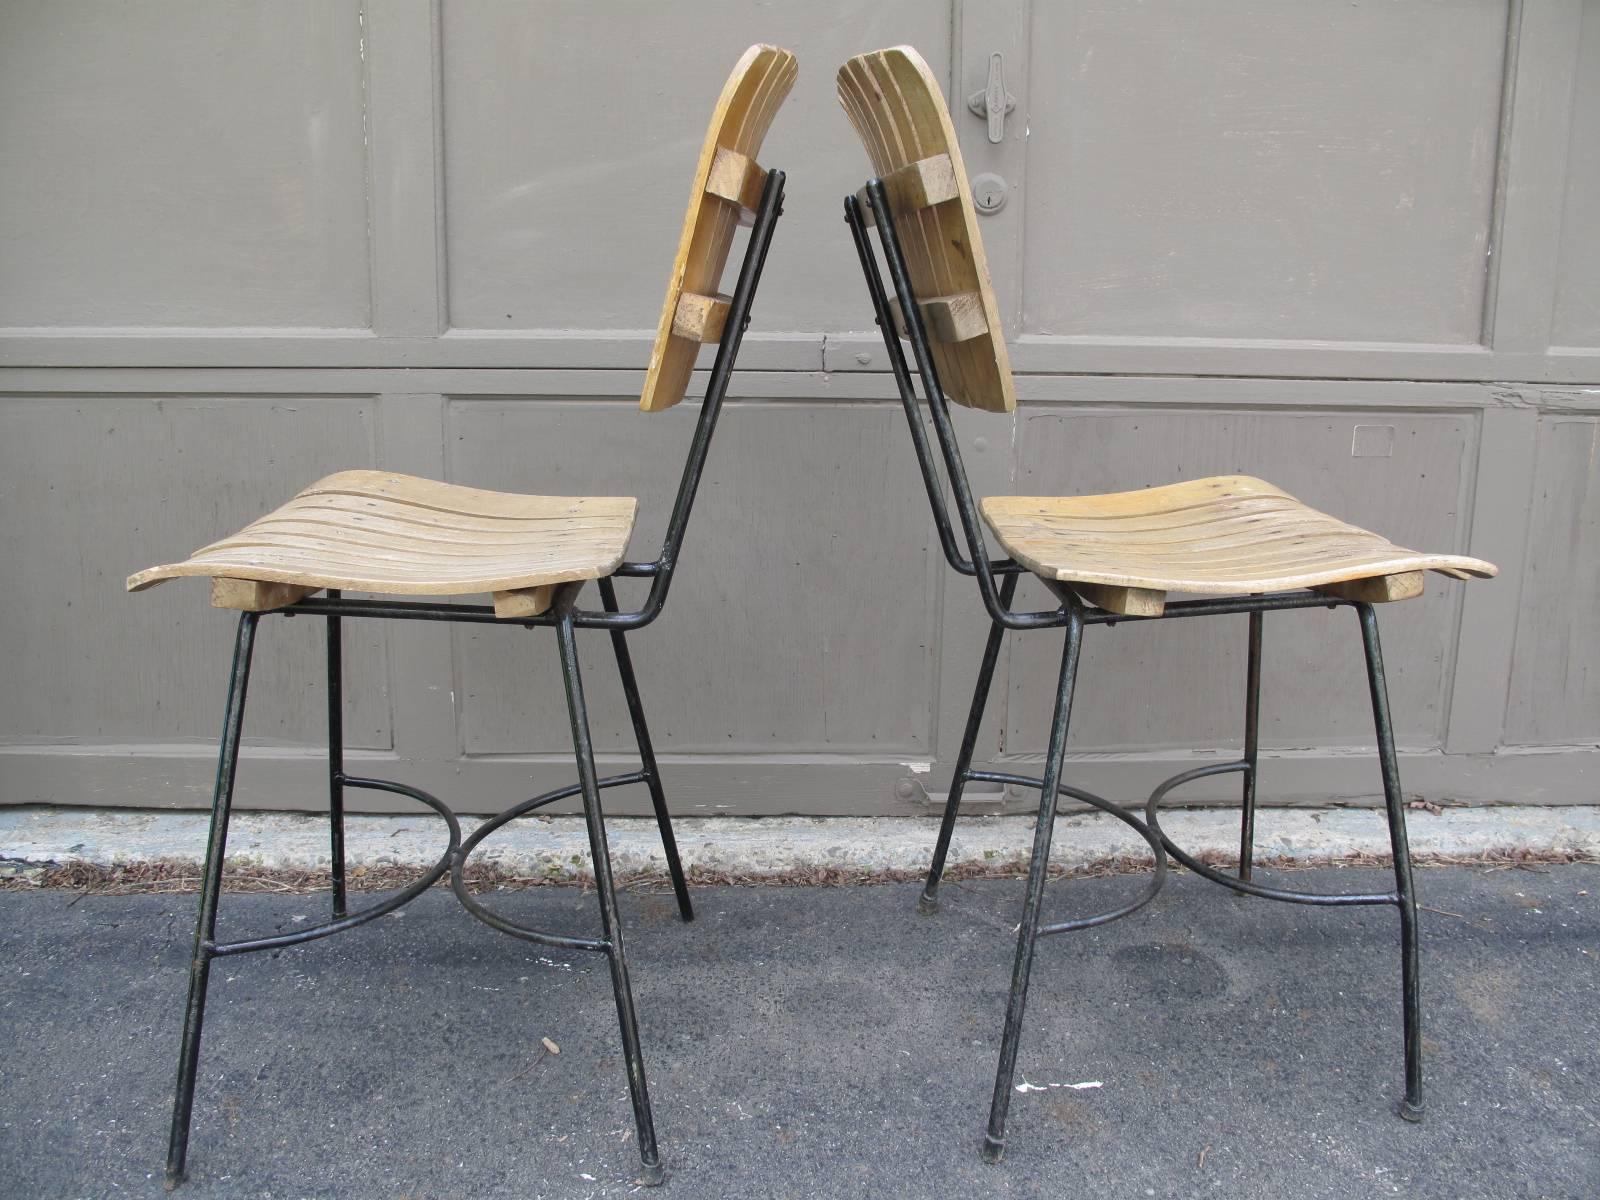 Two iconic Mid-Century iron chairs with slat seats and backs, similar to those by American designer Arthur Umanoff.